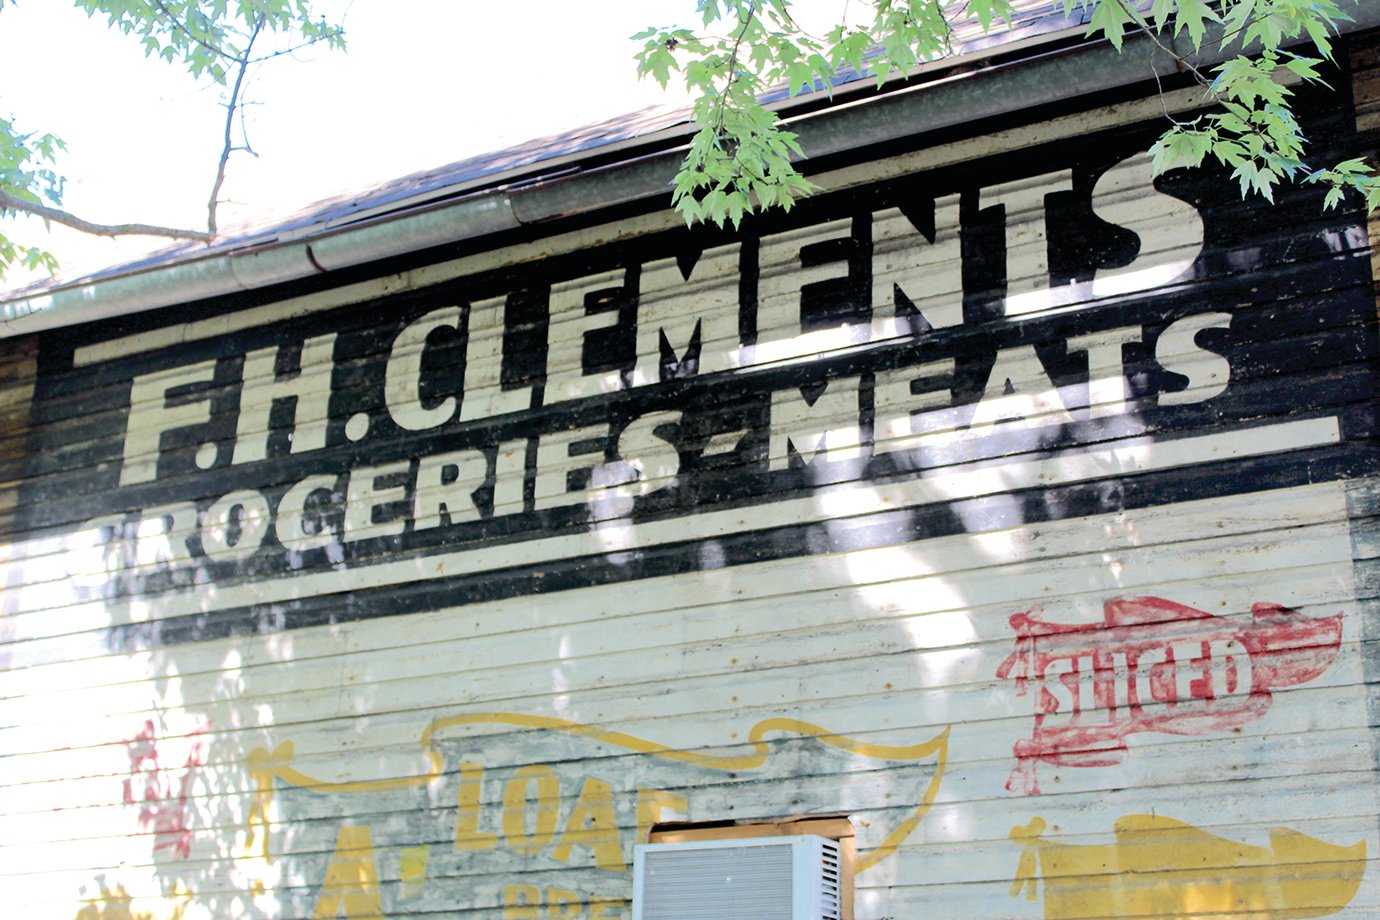 The F.H. Clements sign which emerged from under crumbling particulate siding now greets motorists heading west on East Main Street.